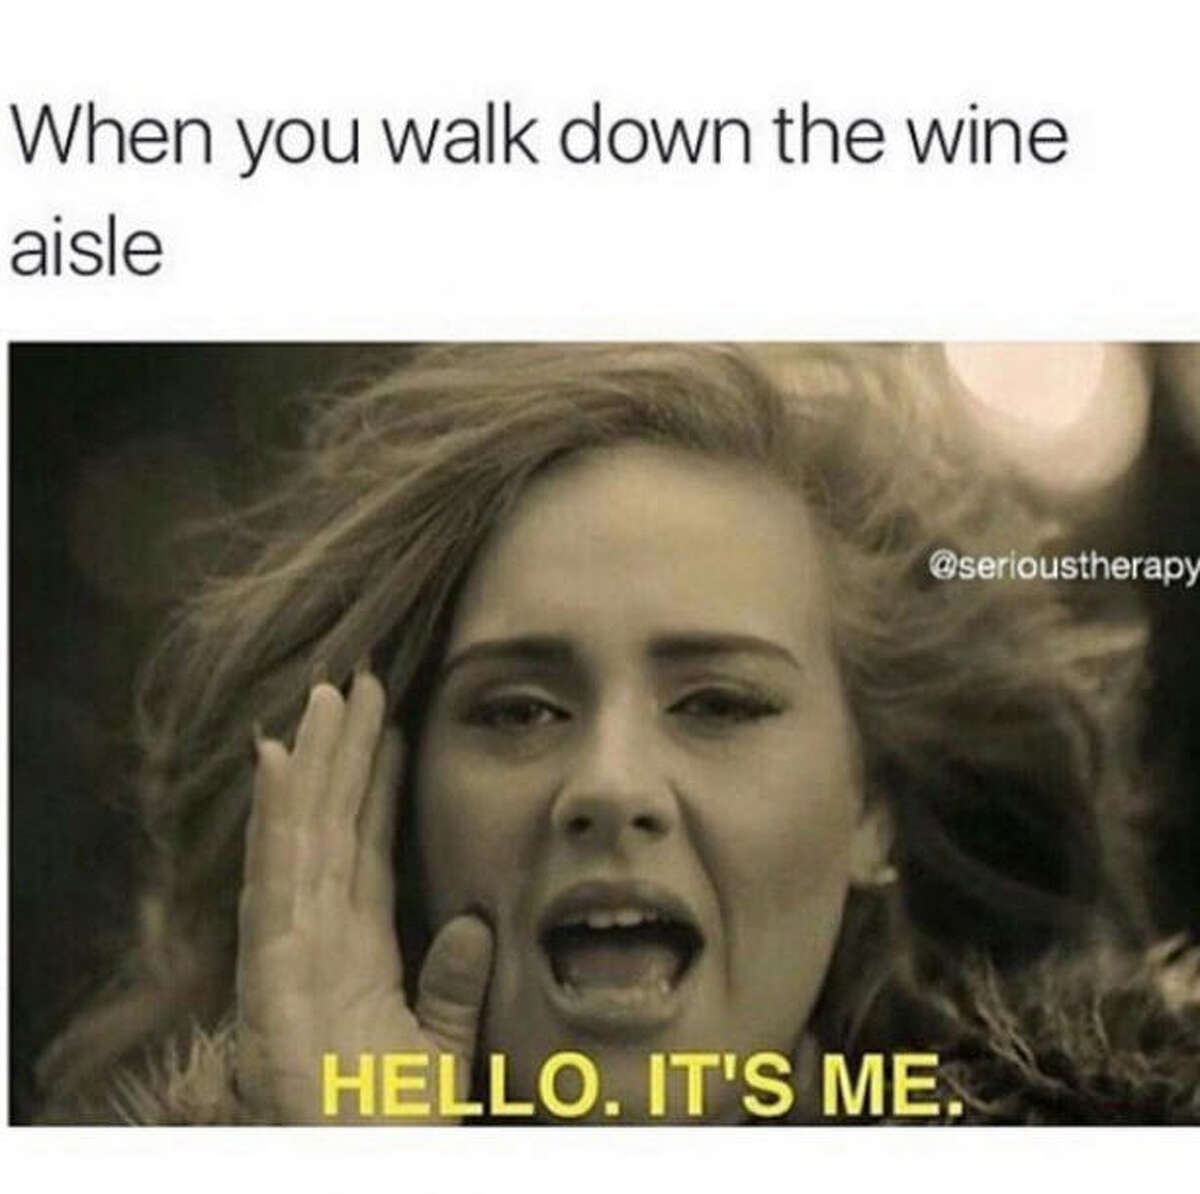 In honor of National Wine Day, we've compiled the memes that perfectly sum up your relationship with wine. Like this one via @SeriousTherapy.